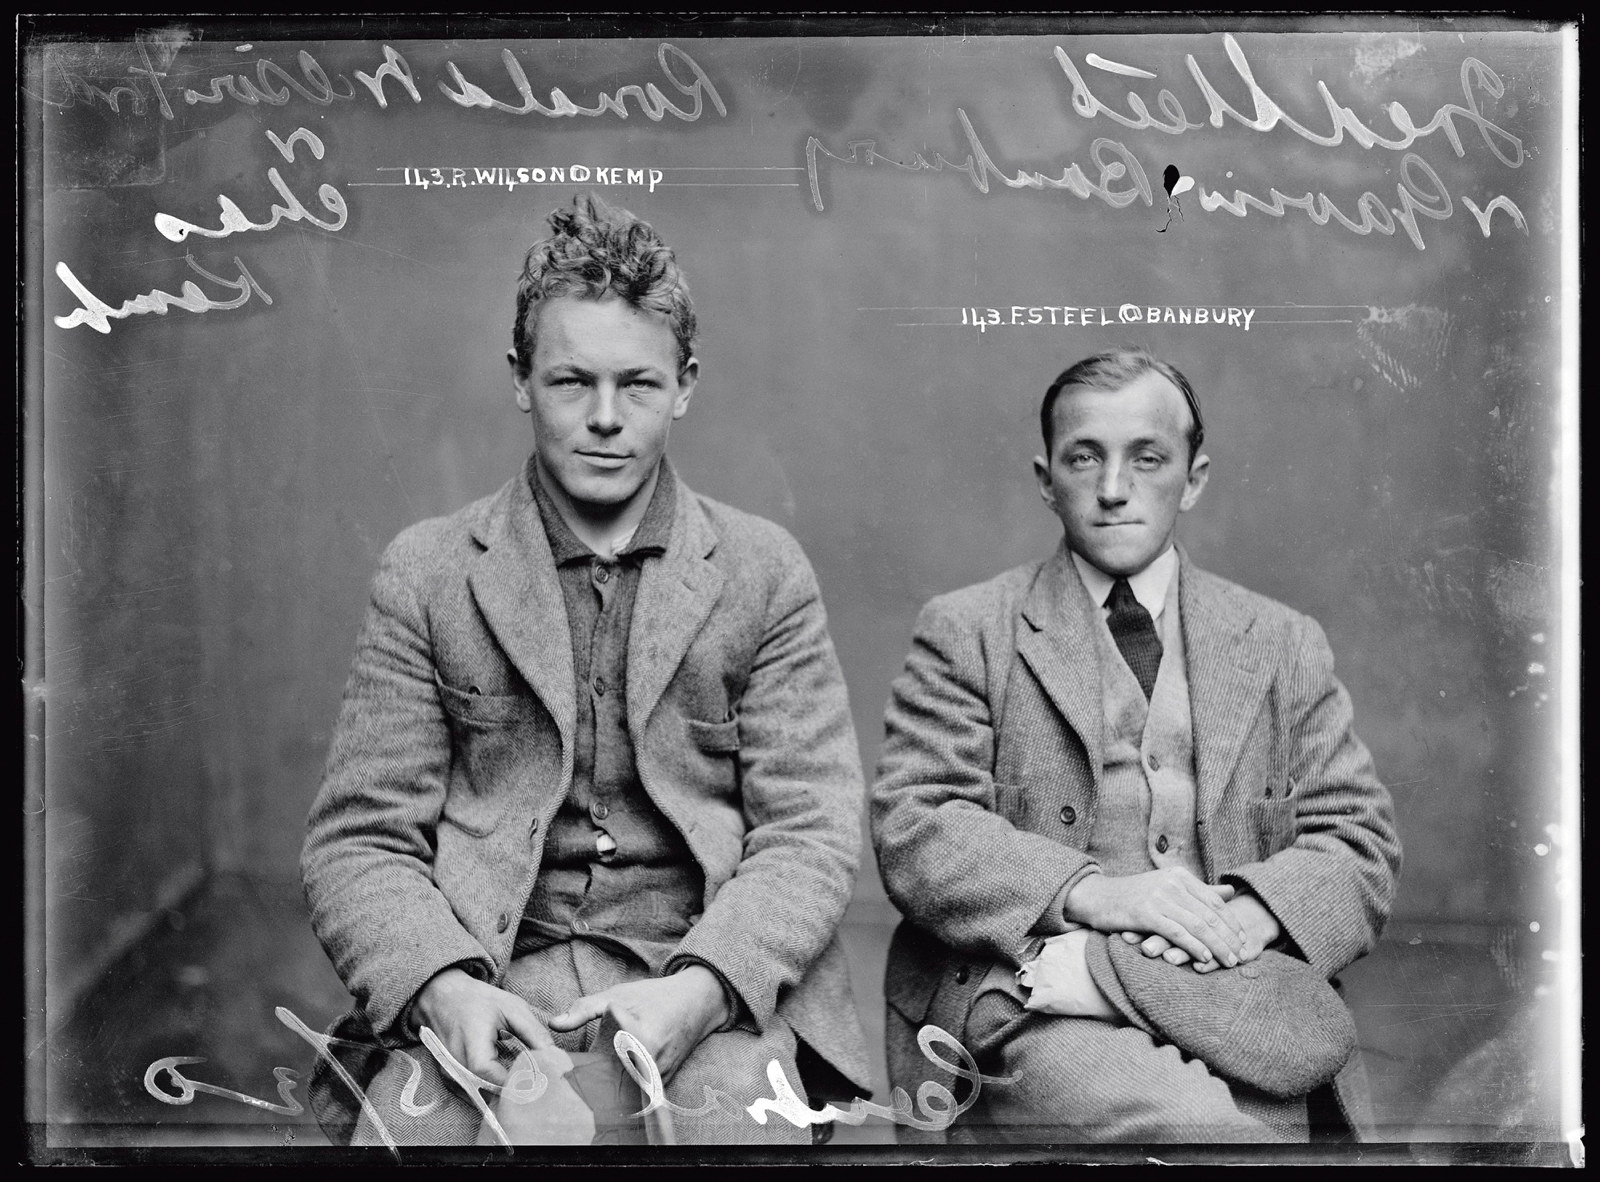 Black and white mugshot of two seated men.